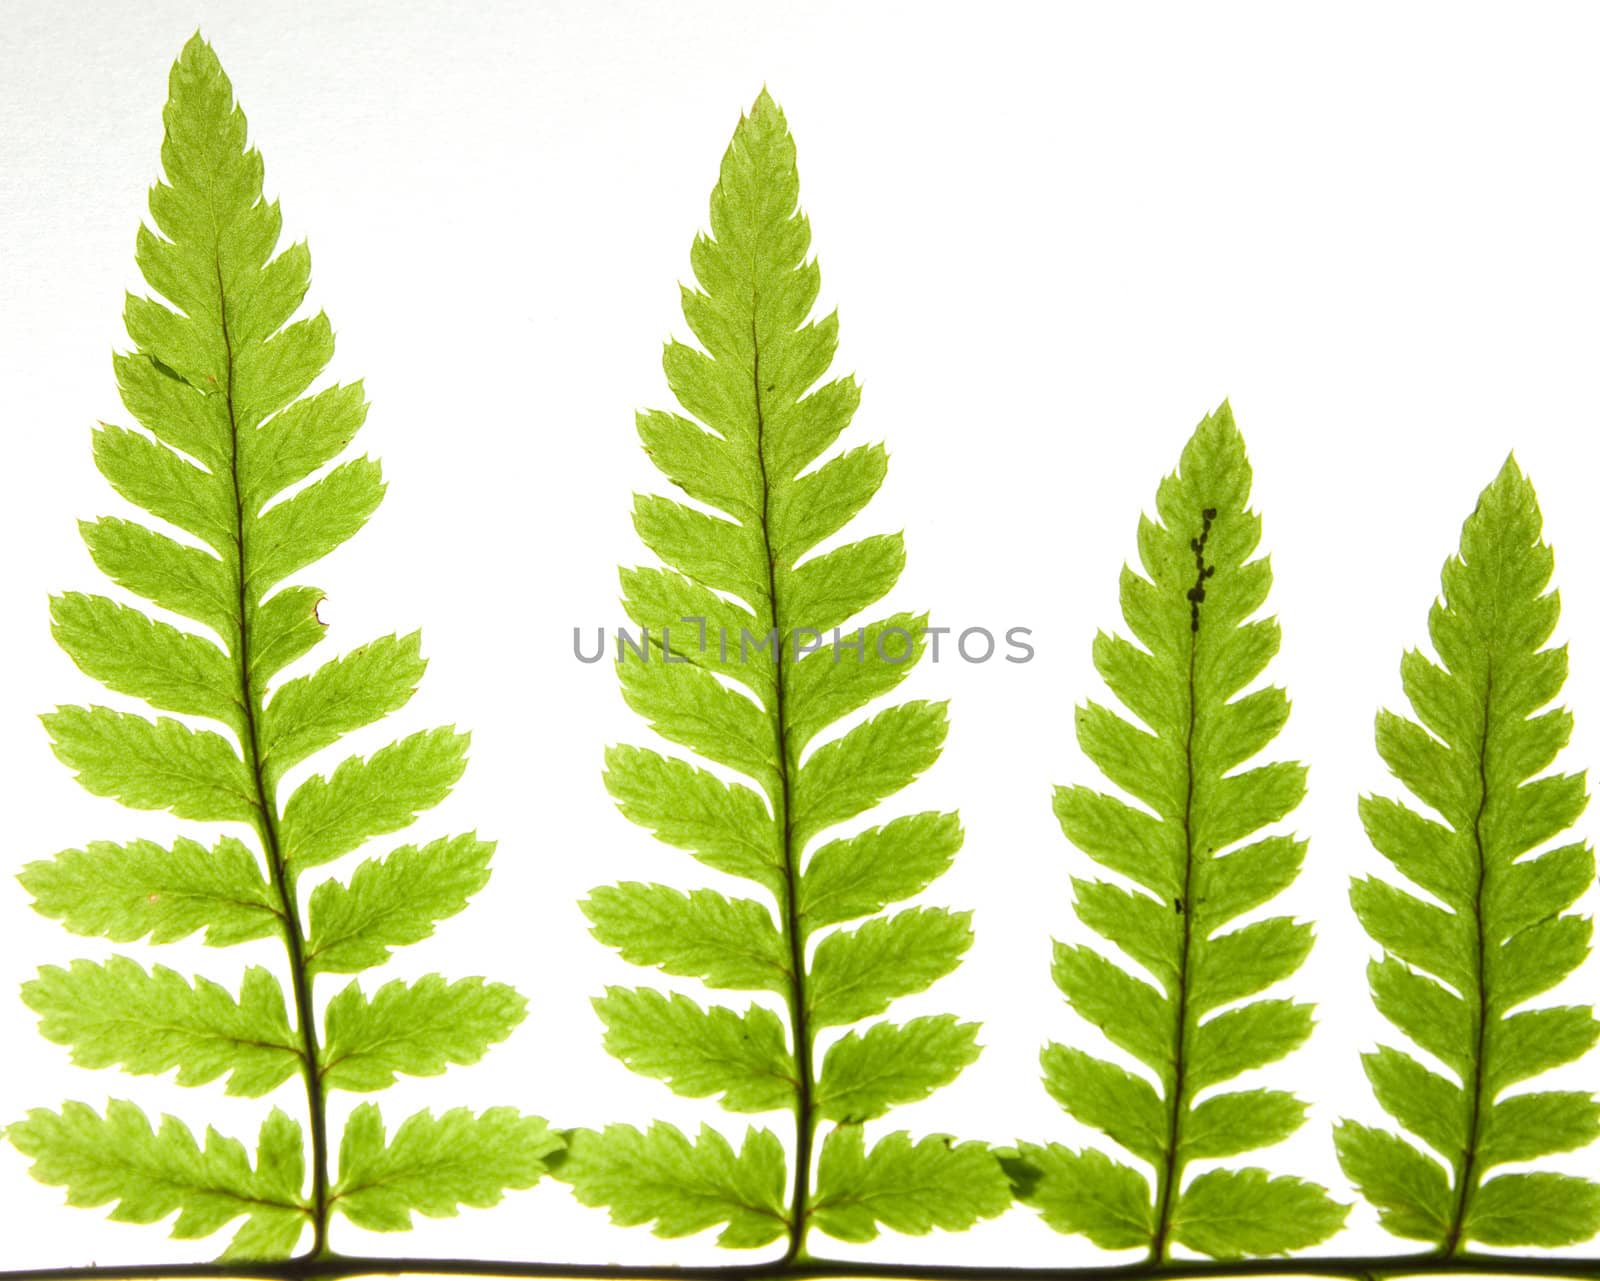 Detail of green fern leaves by Arsen